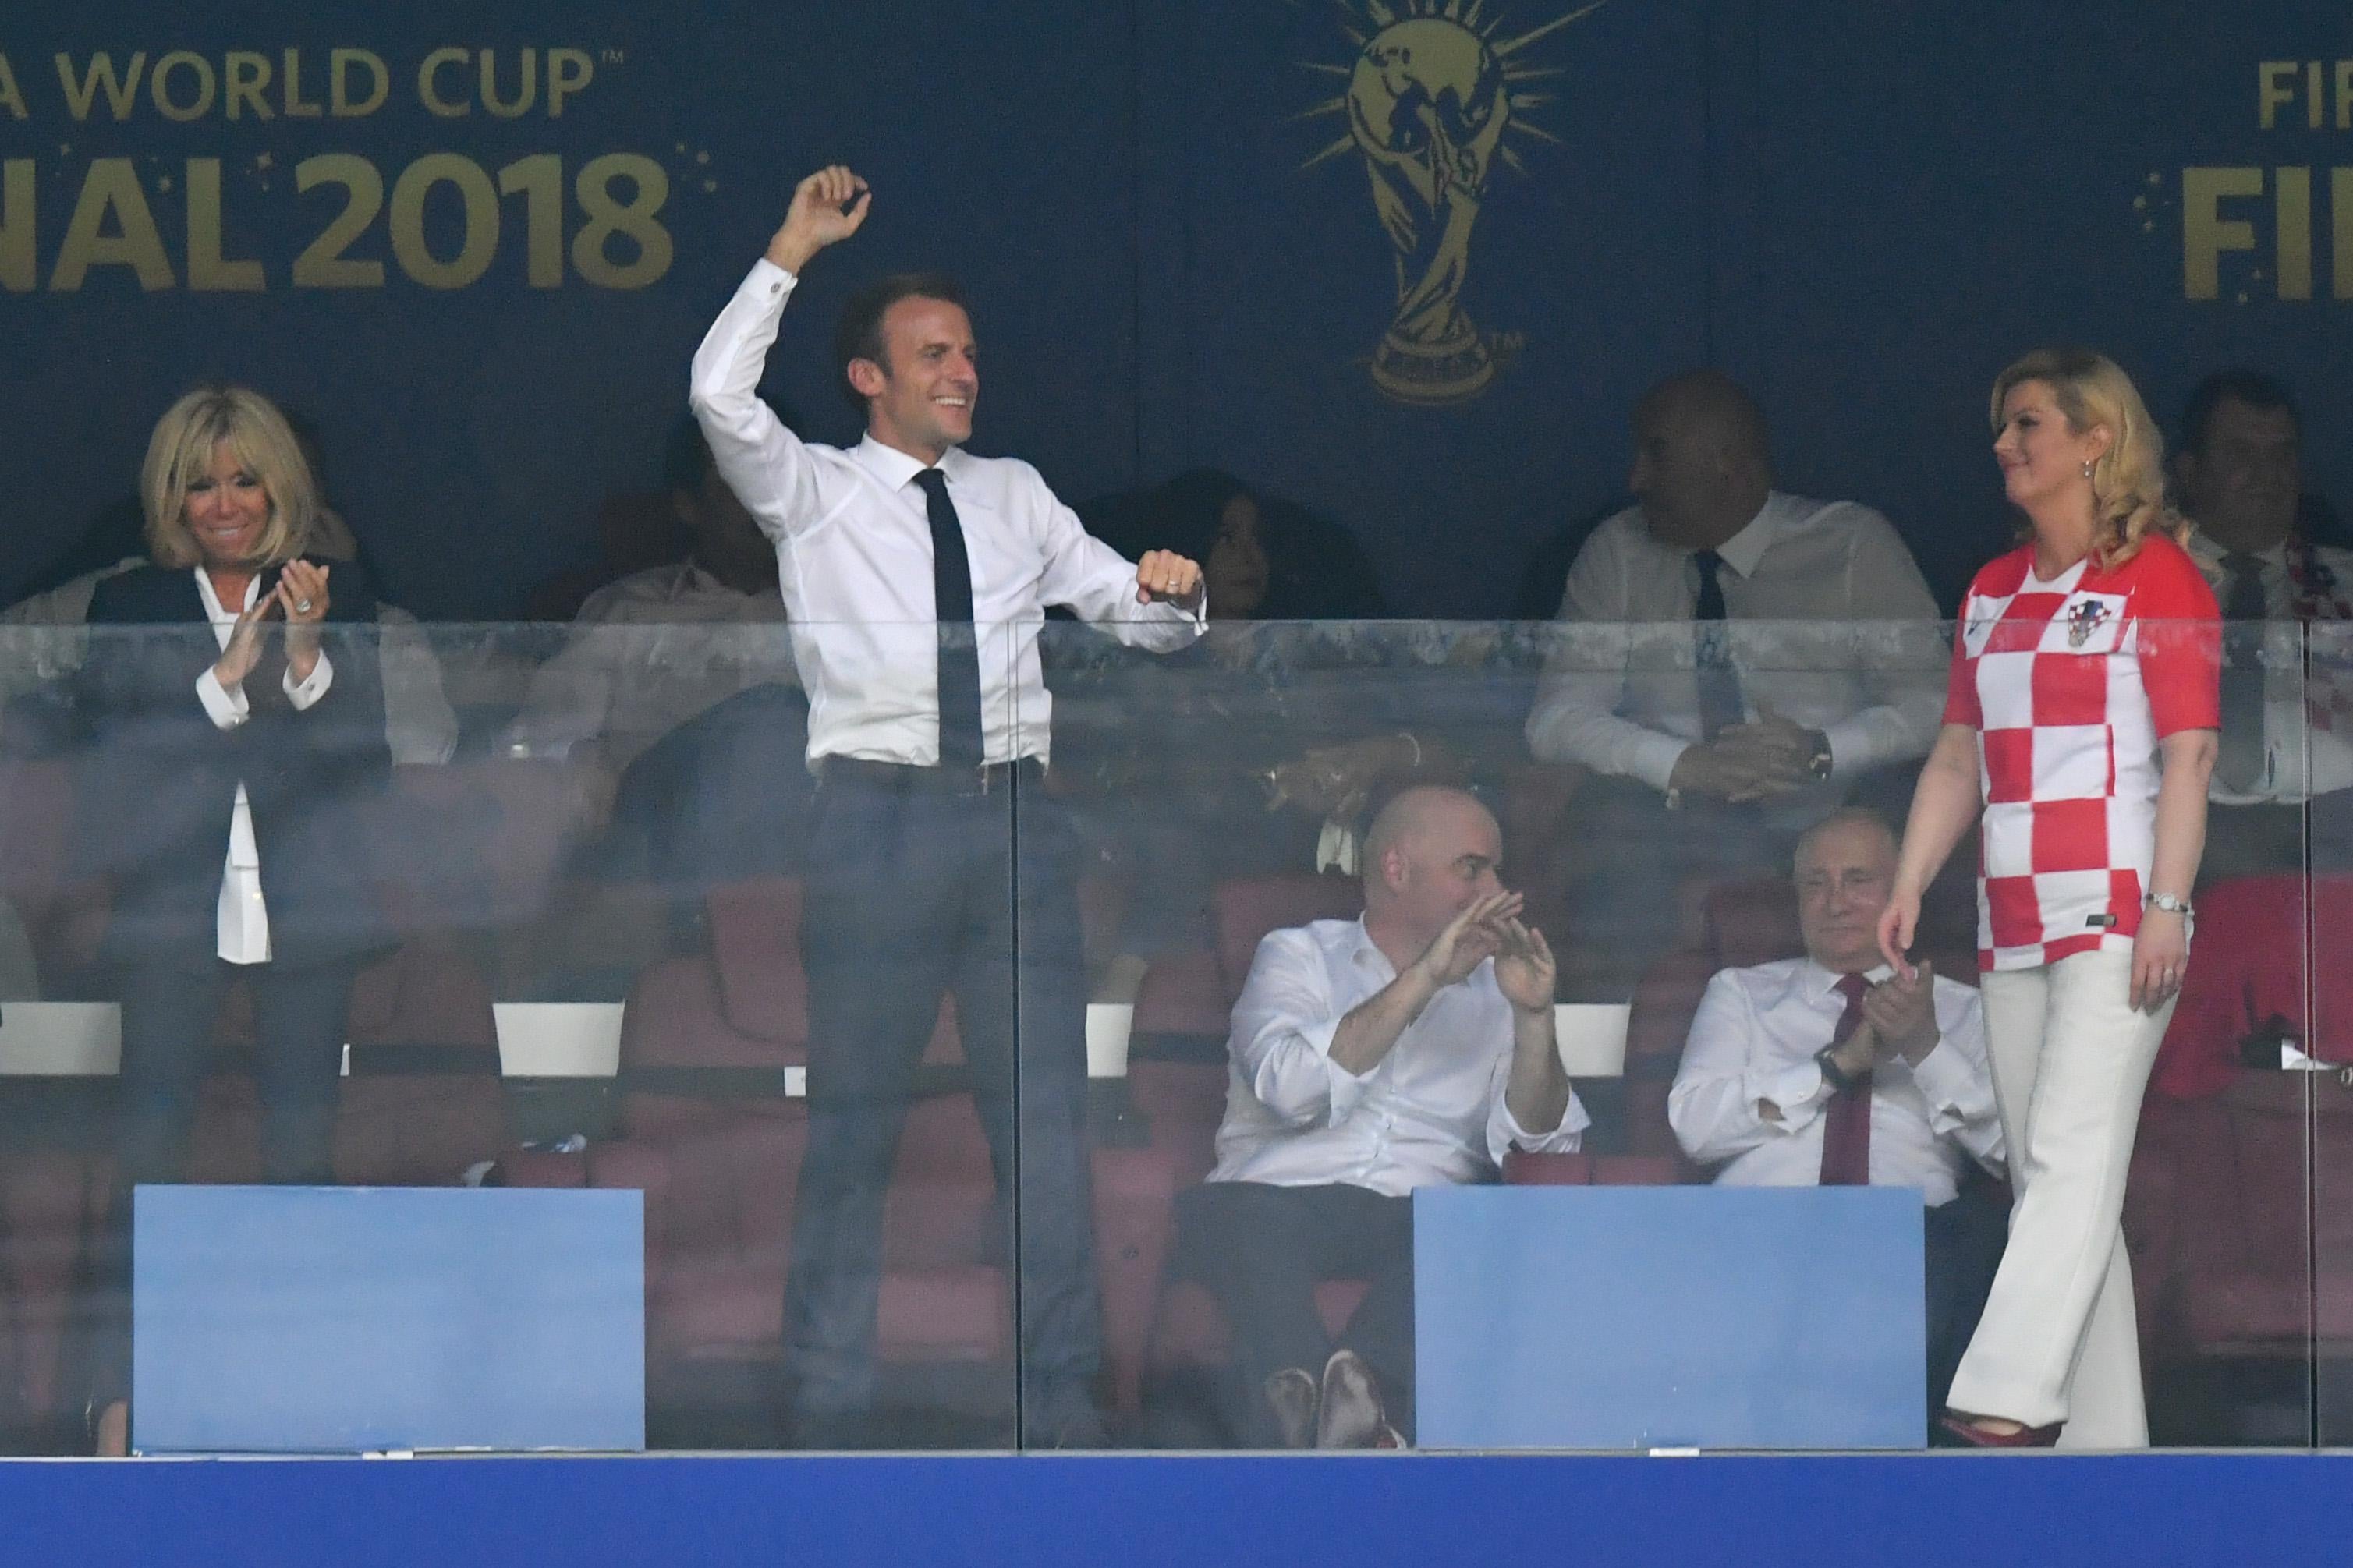 French President Emmanuel Macron celebrates after his team's fourth goal during the 2018 FIFA World Cup Final between France and Croatia at Luzhniki Stadium on July 15, 2018 in Moscow, Russia.